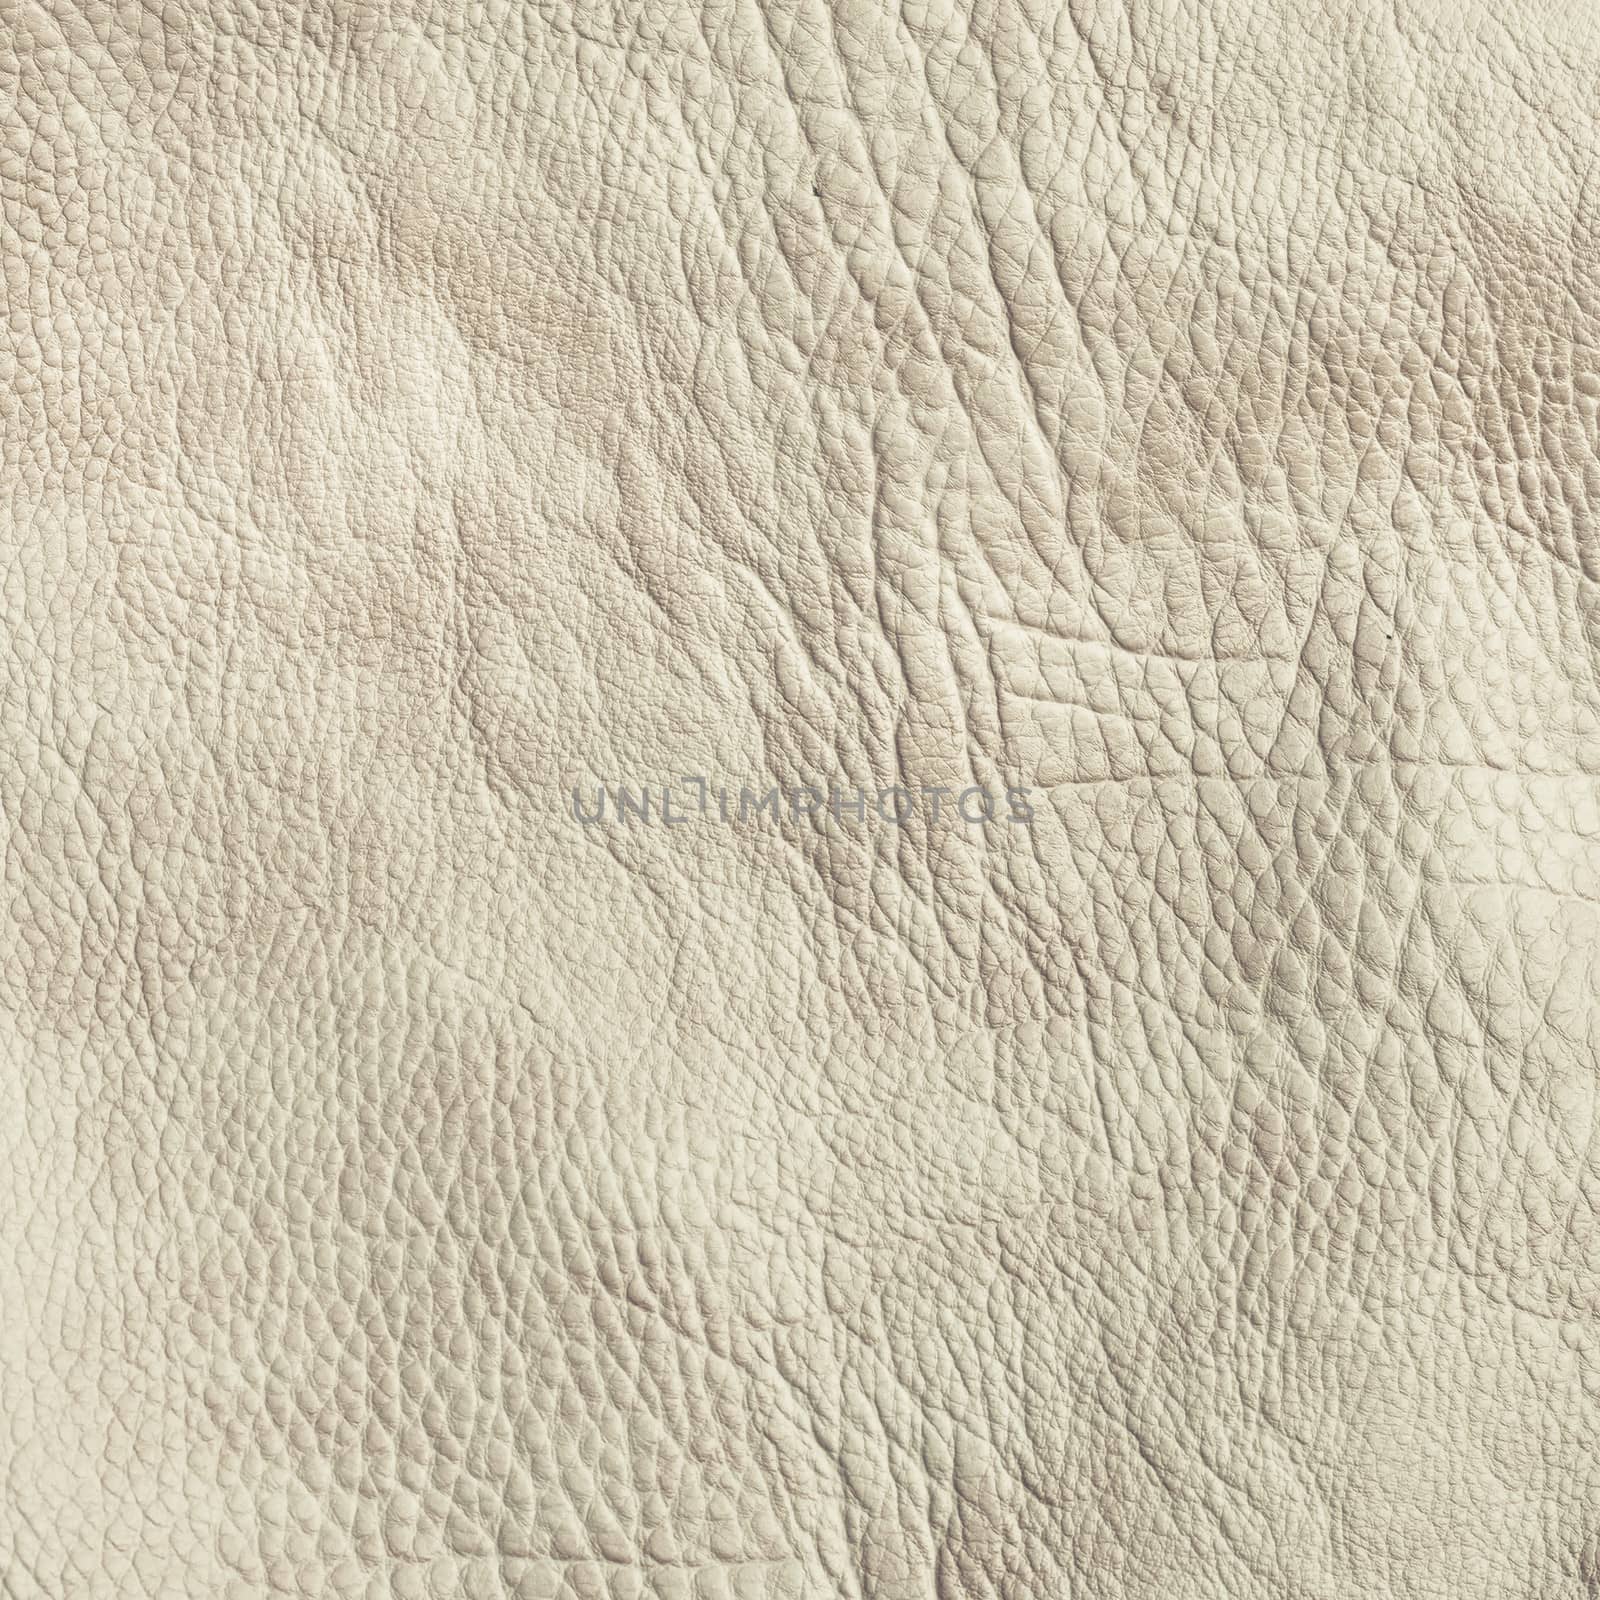 Leather texture as a detailed background image